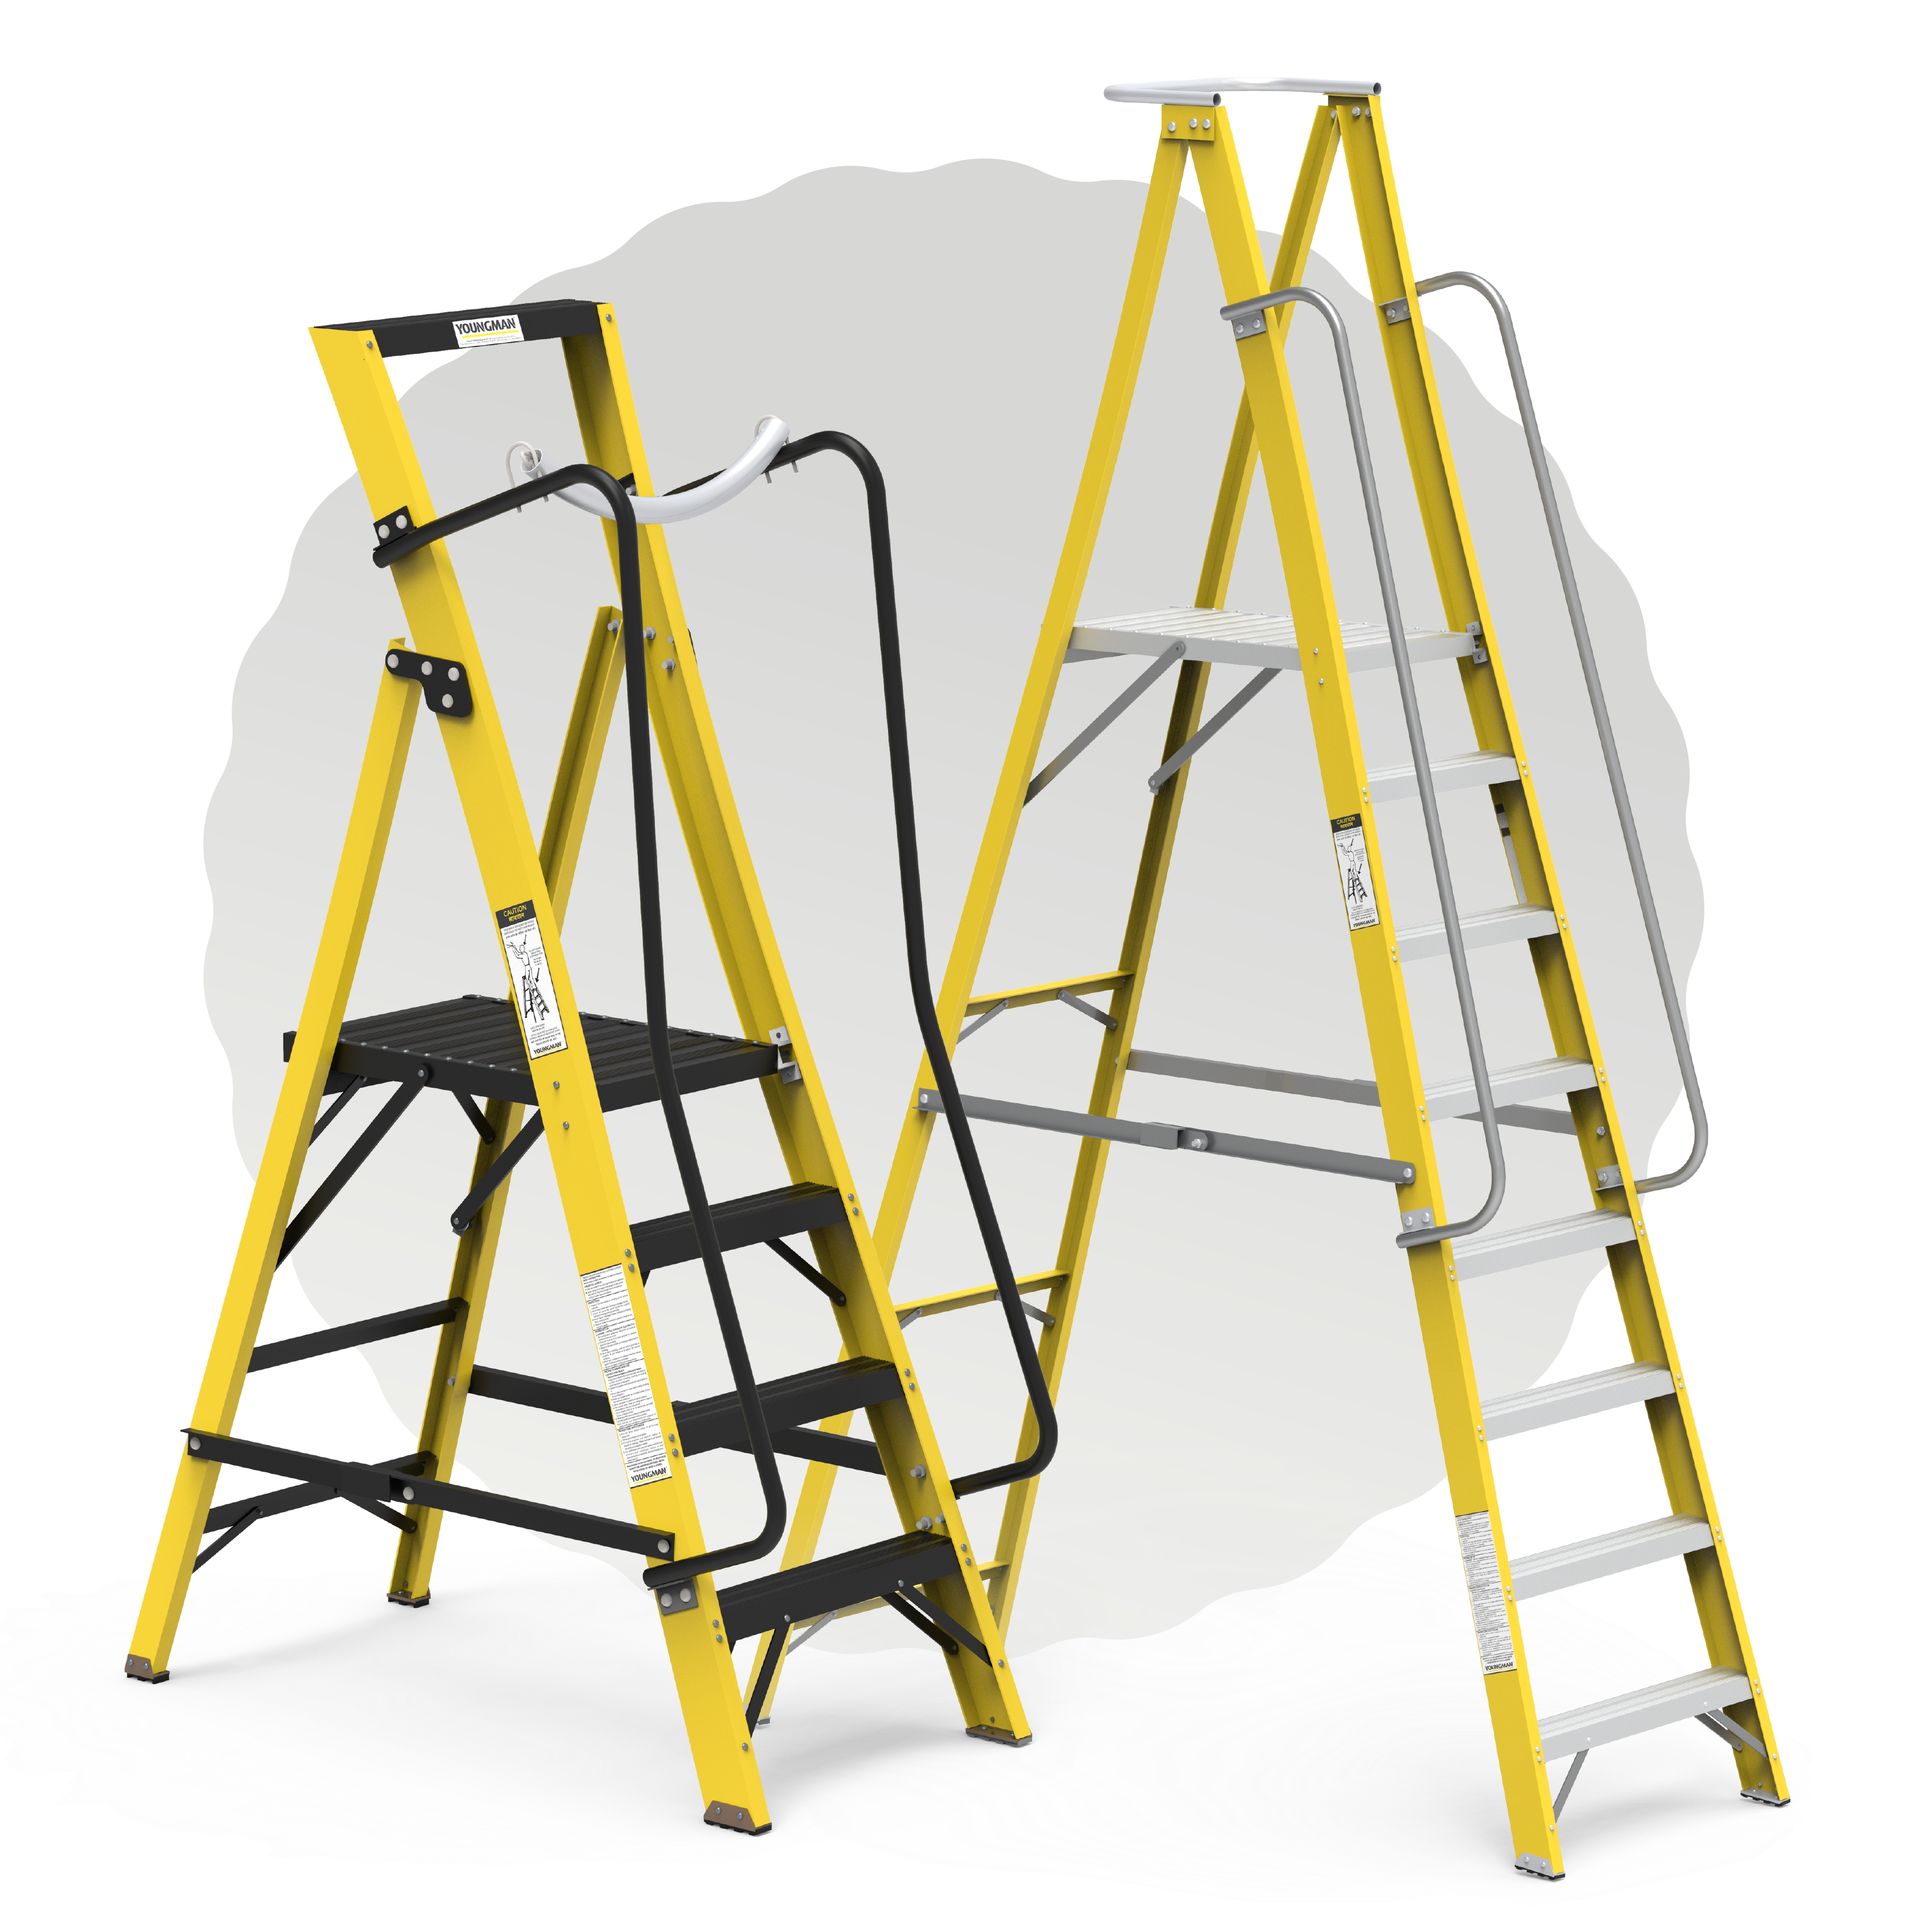 Youngman Manufacturing: India's #1 Ladders, Scaffolds & Work Platform Manufacturer